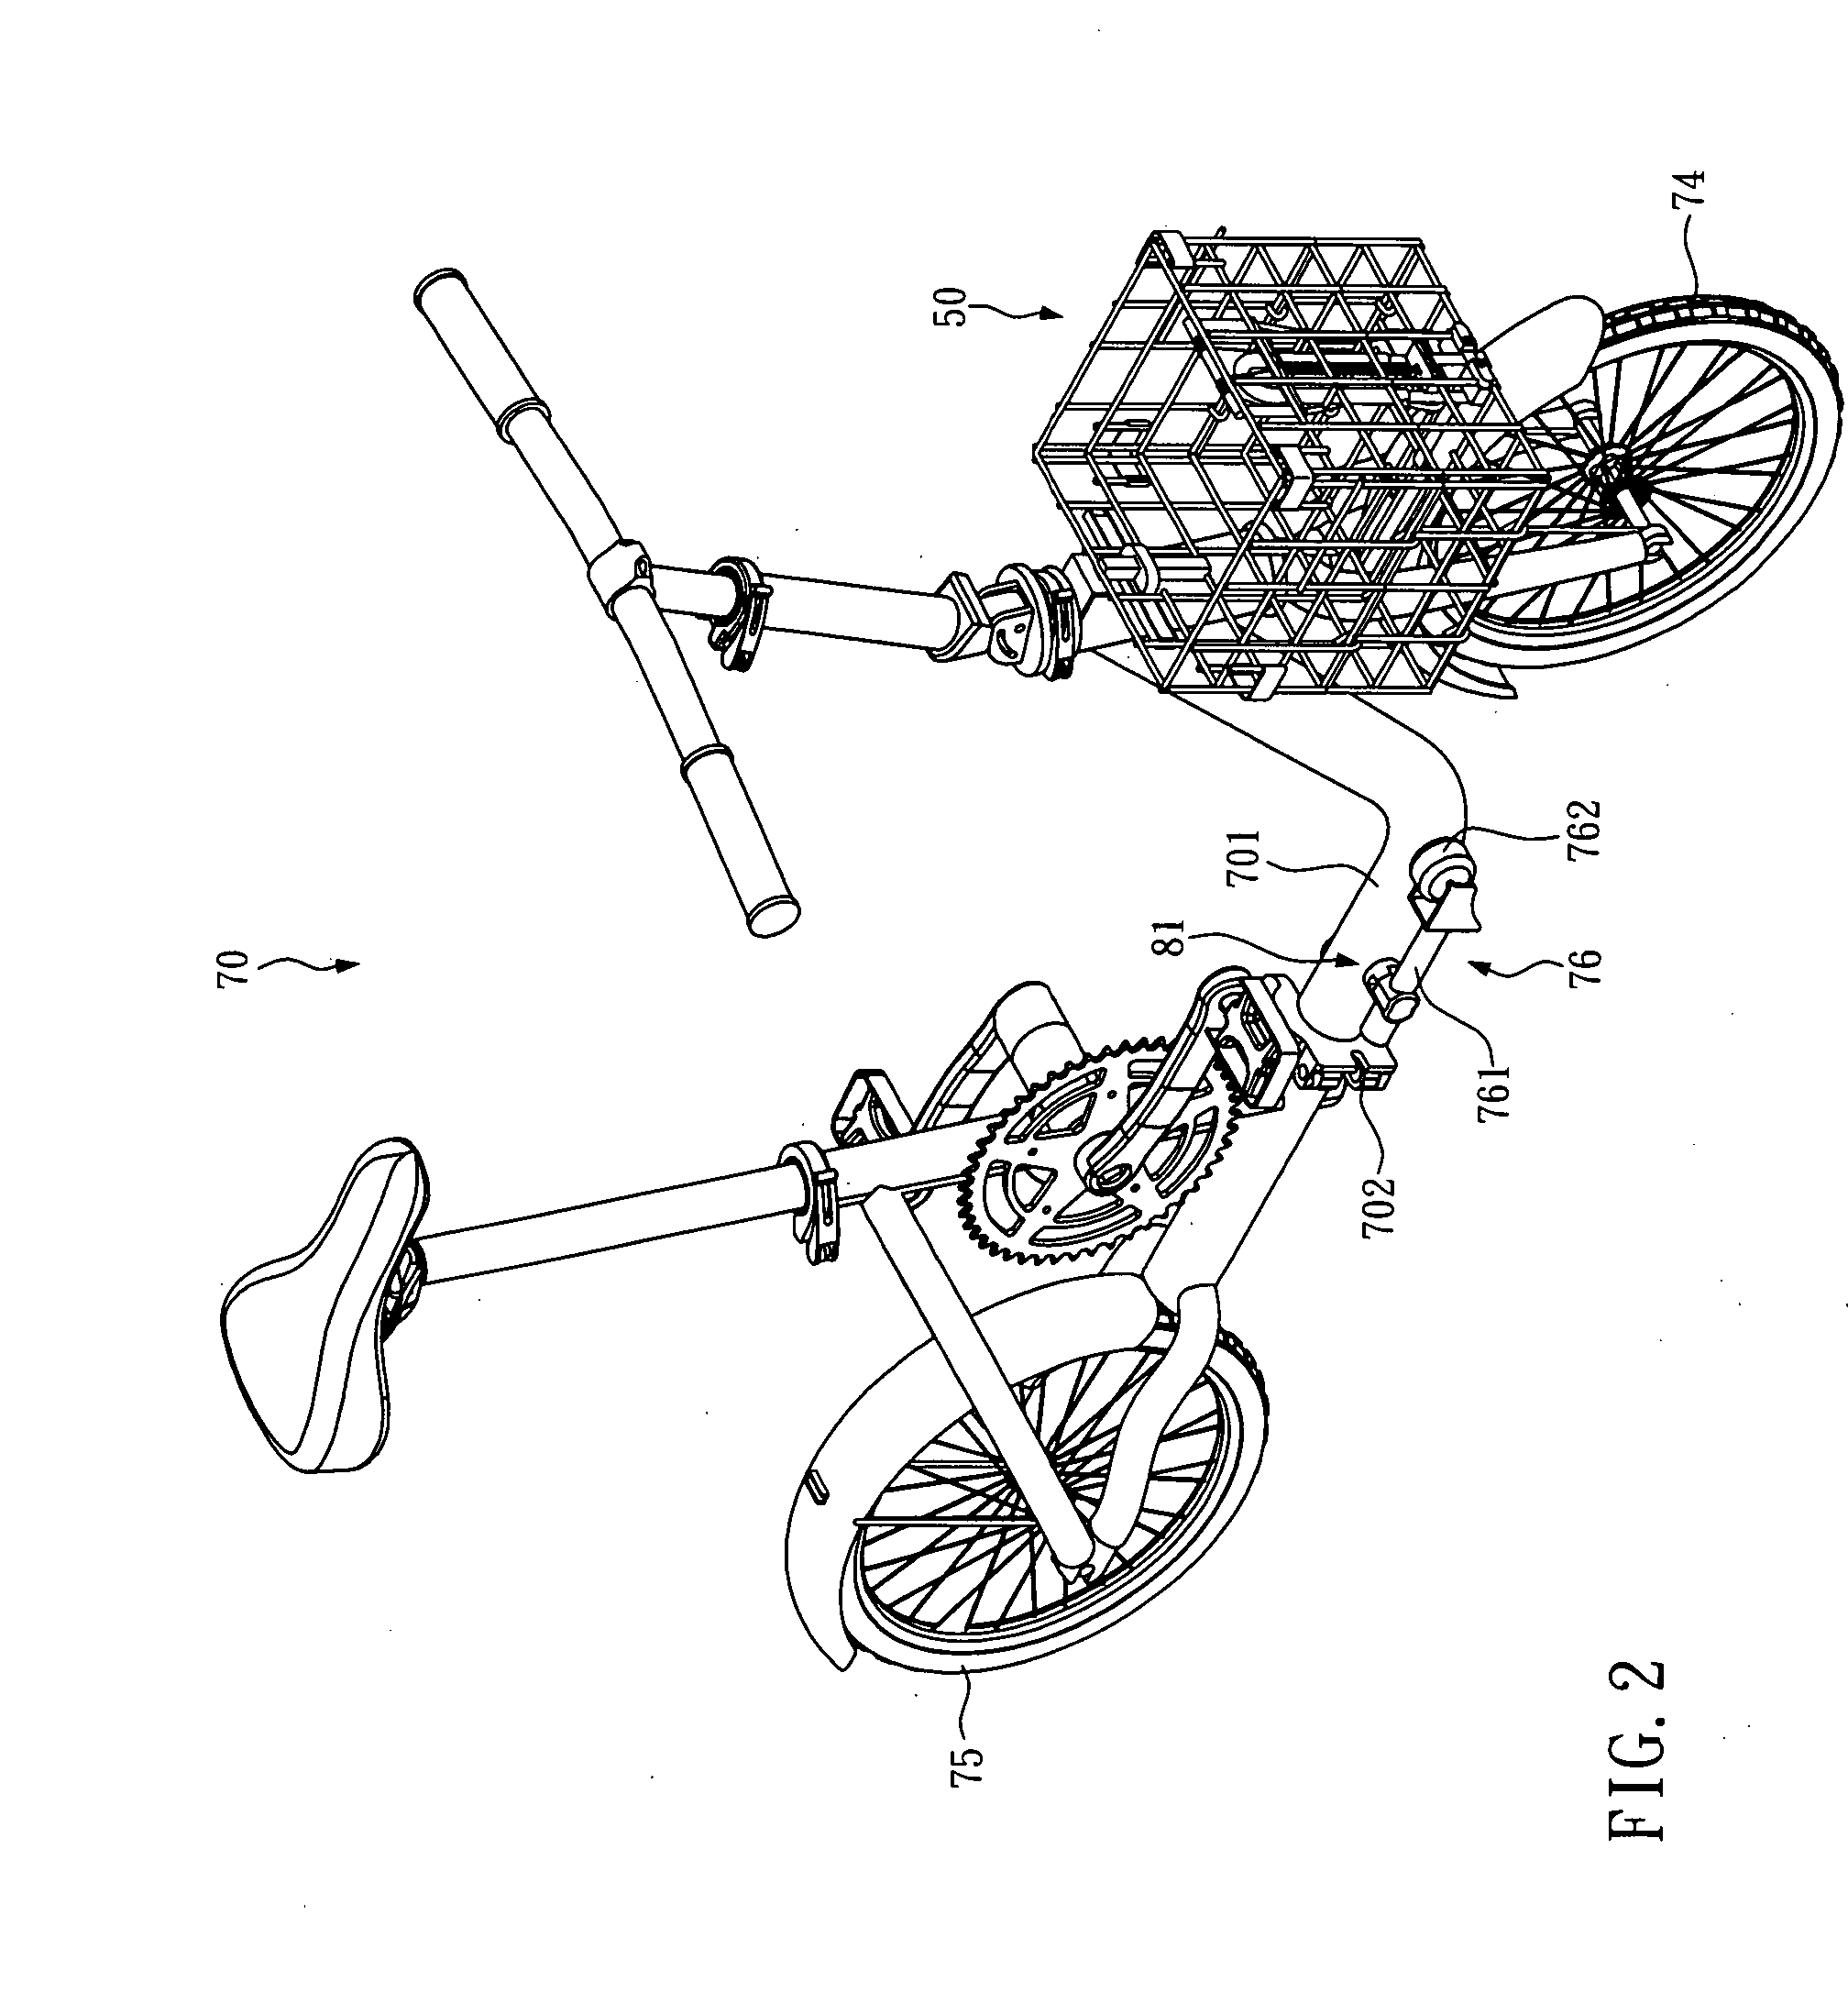 Foldable bicycle